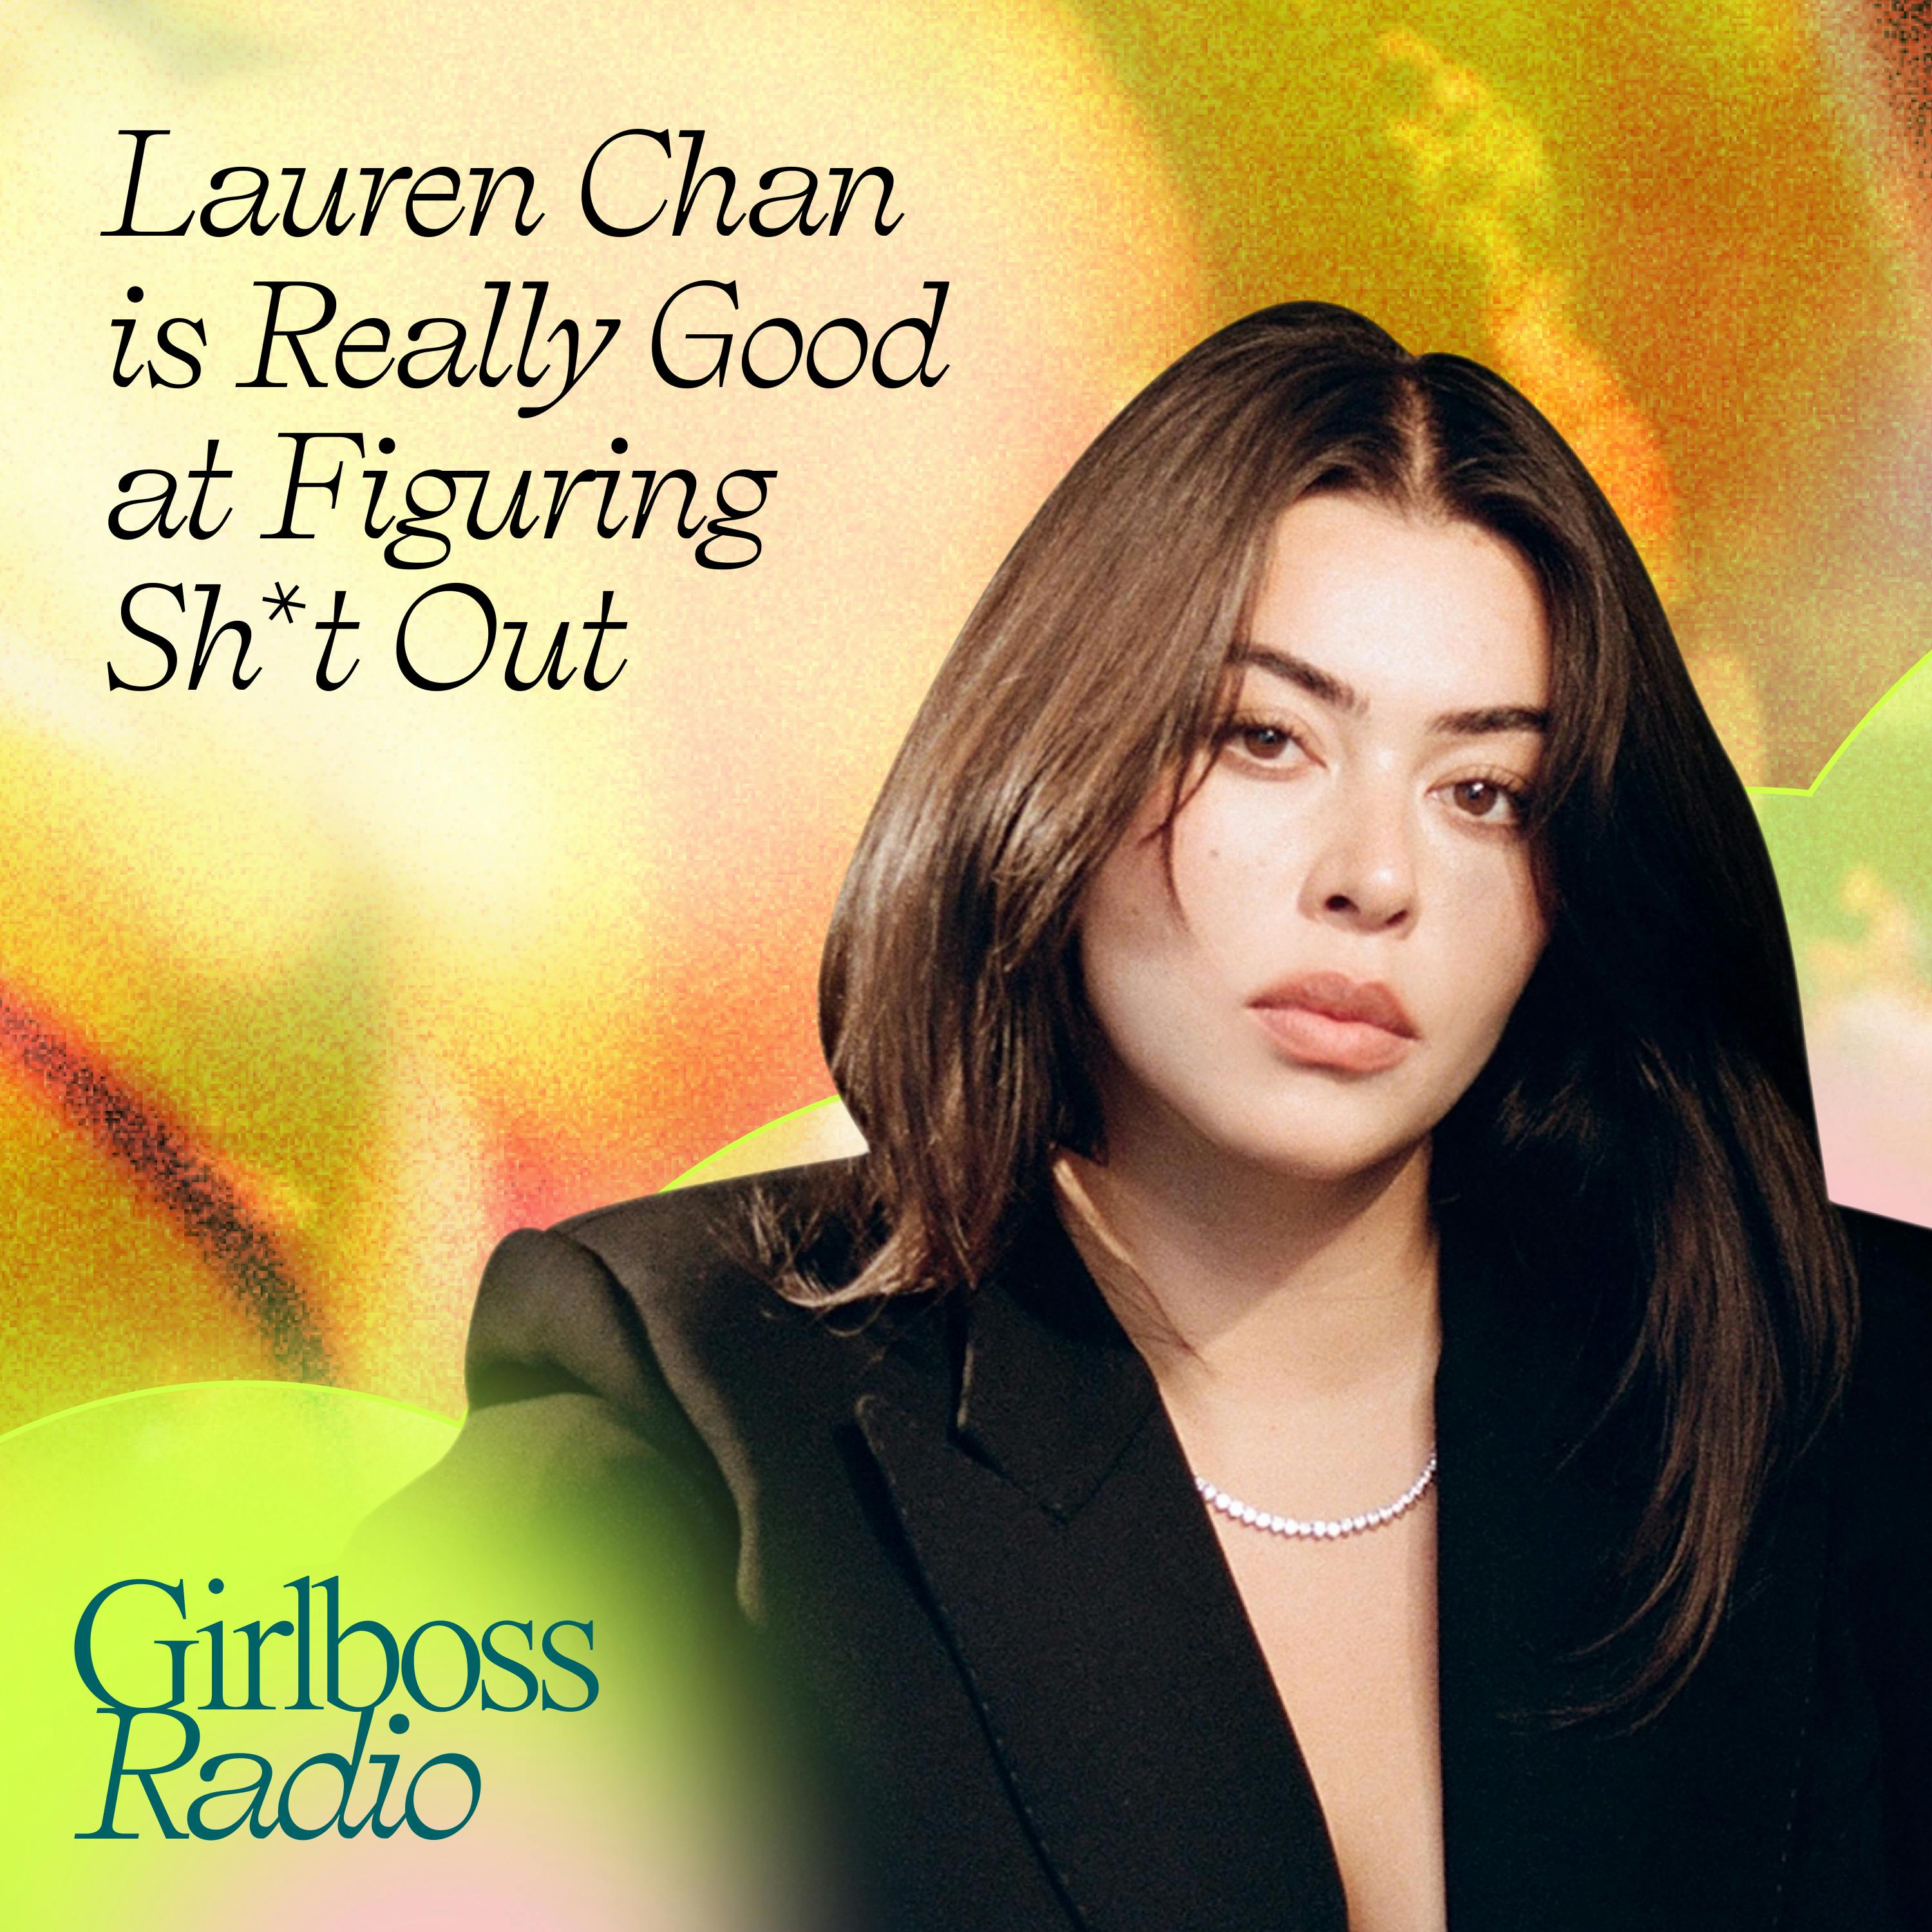 Lauren Chan is Really Good at Figuring Sh*t Out